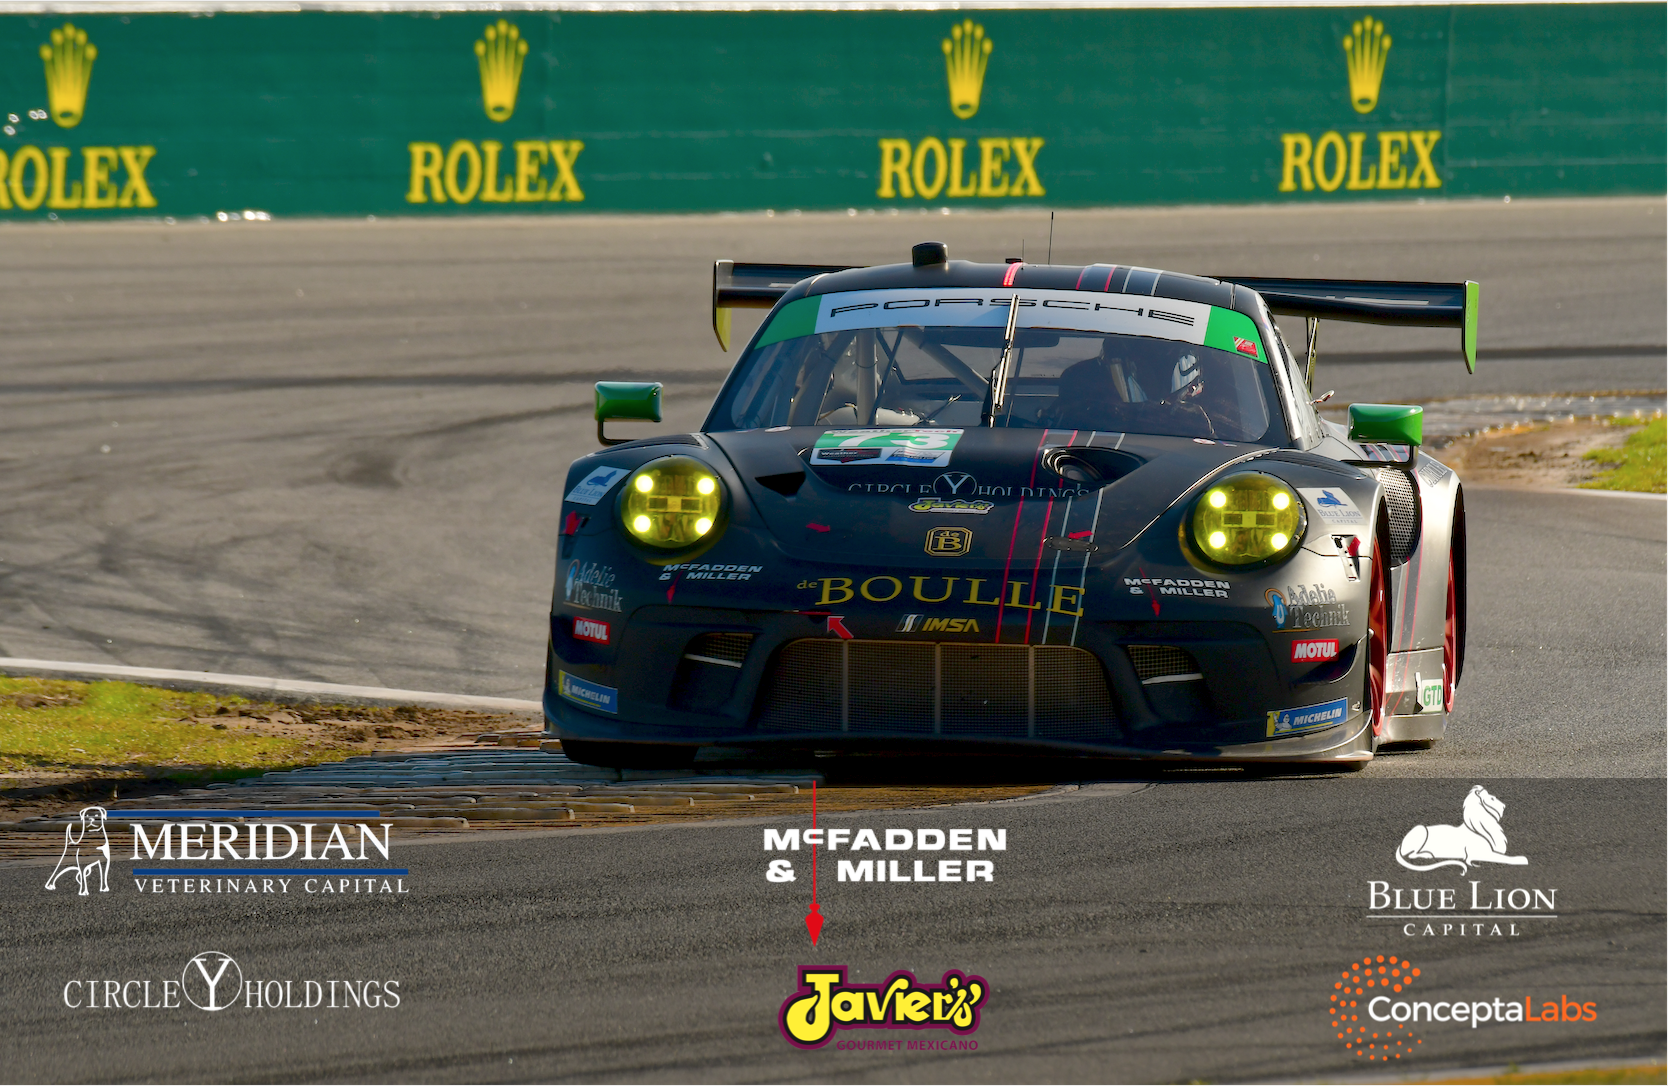 7th Place Finish in ROLEX 24 Hours of Daytona Motorsports, News & Events